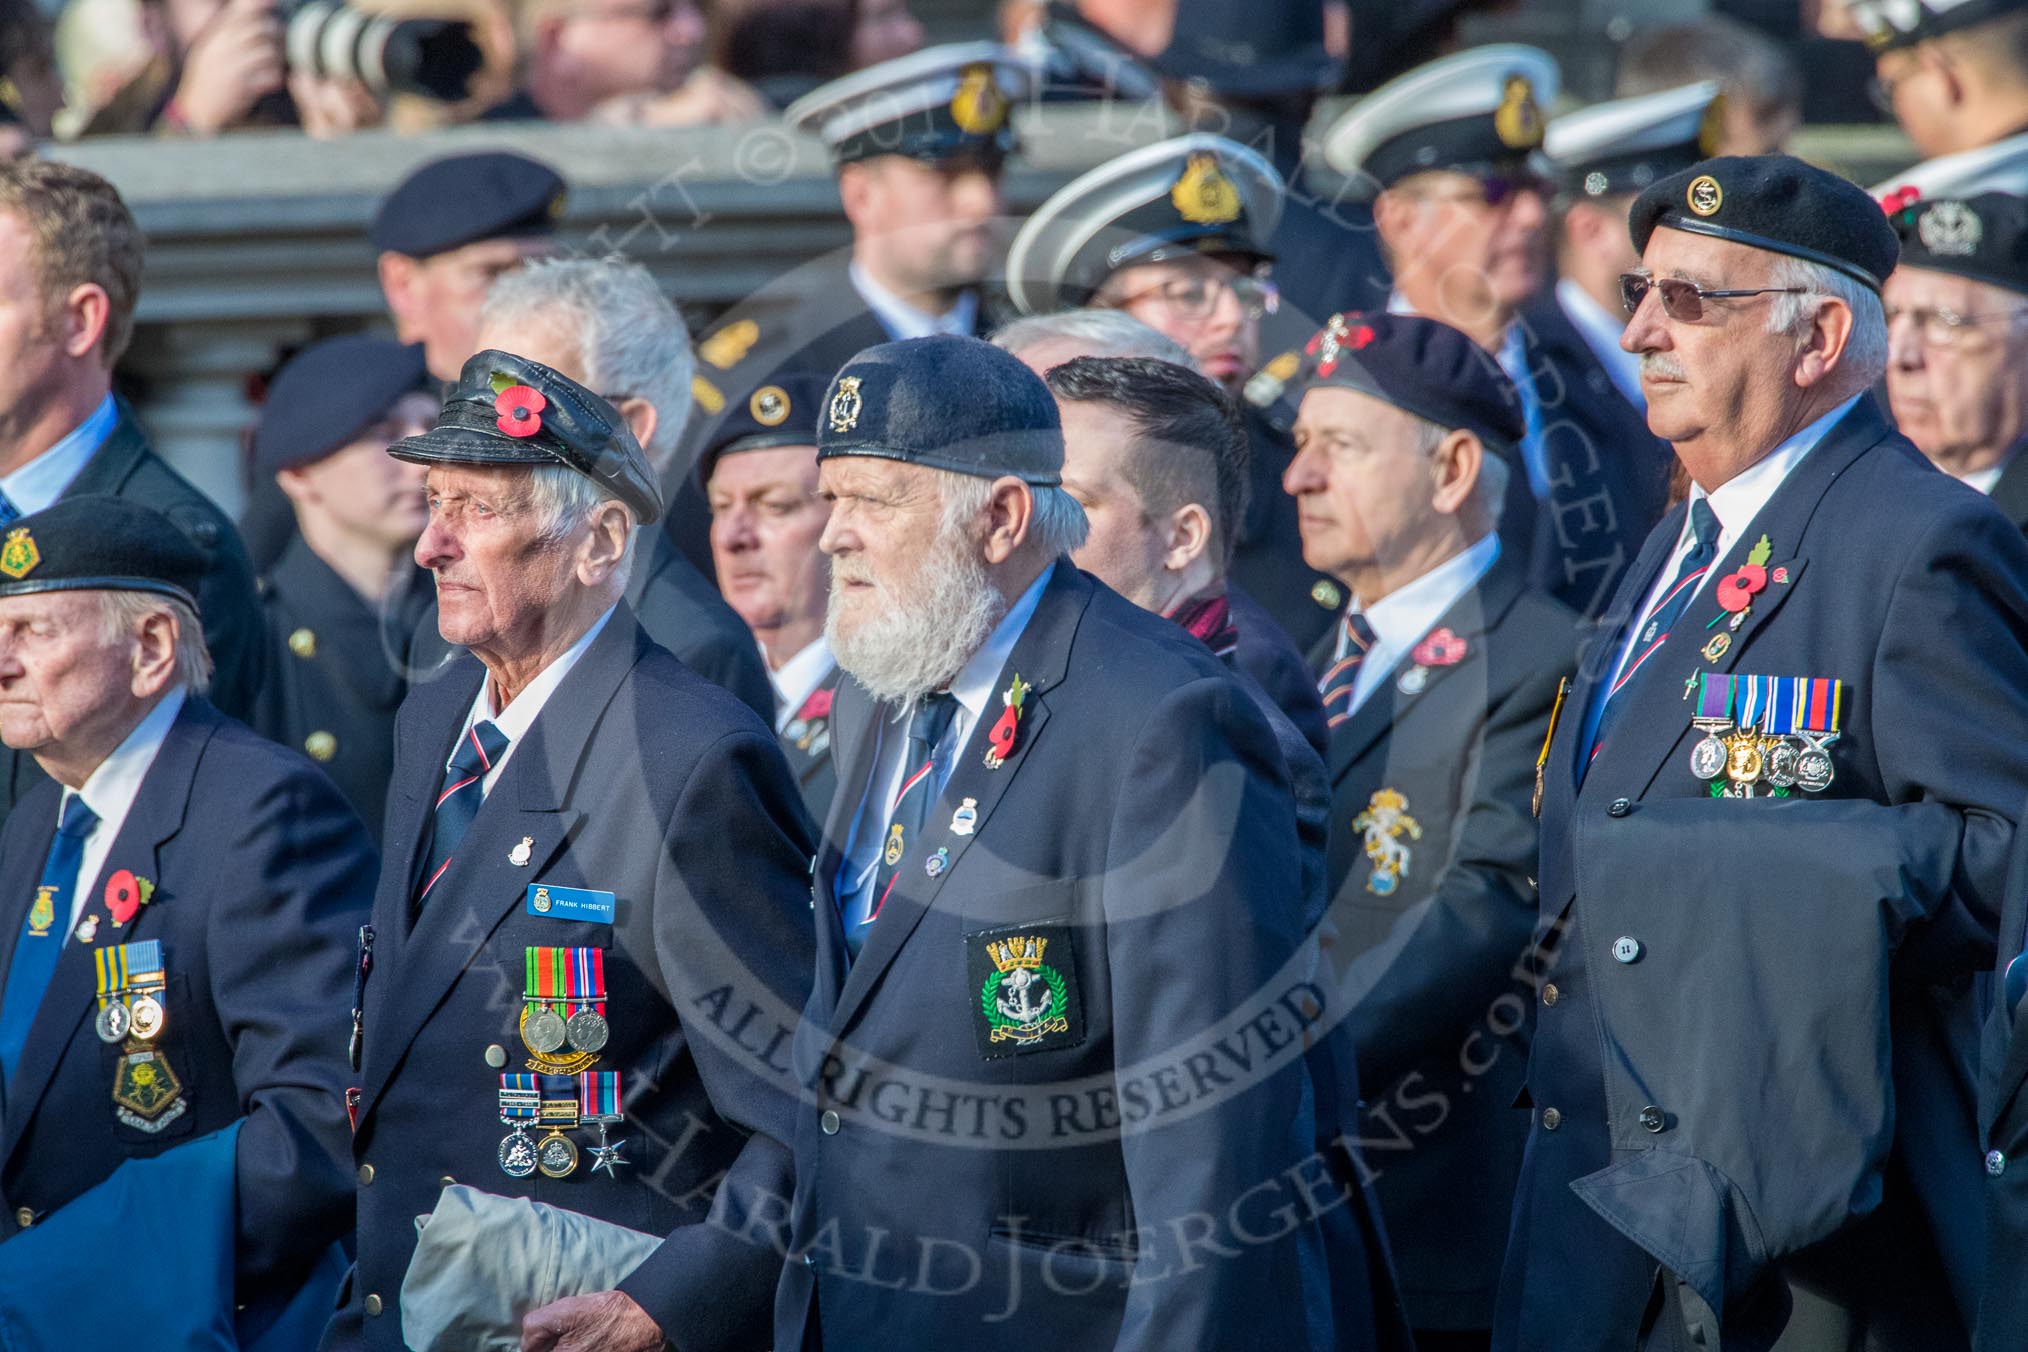 Royal Naval Association  (Group E1, 94 members) during the Royal British Legion March Past on Remembrance Sunday at the Cenotaph, Whitehall, Westminster, London, 11 November 2018, 11:41.